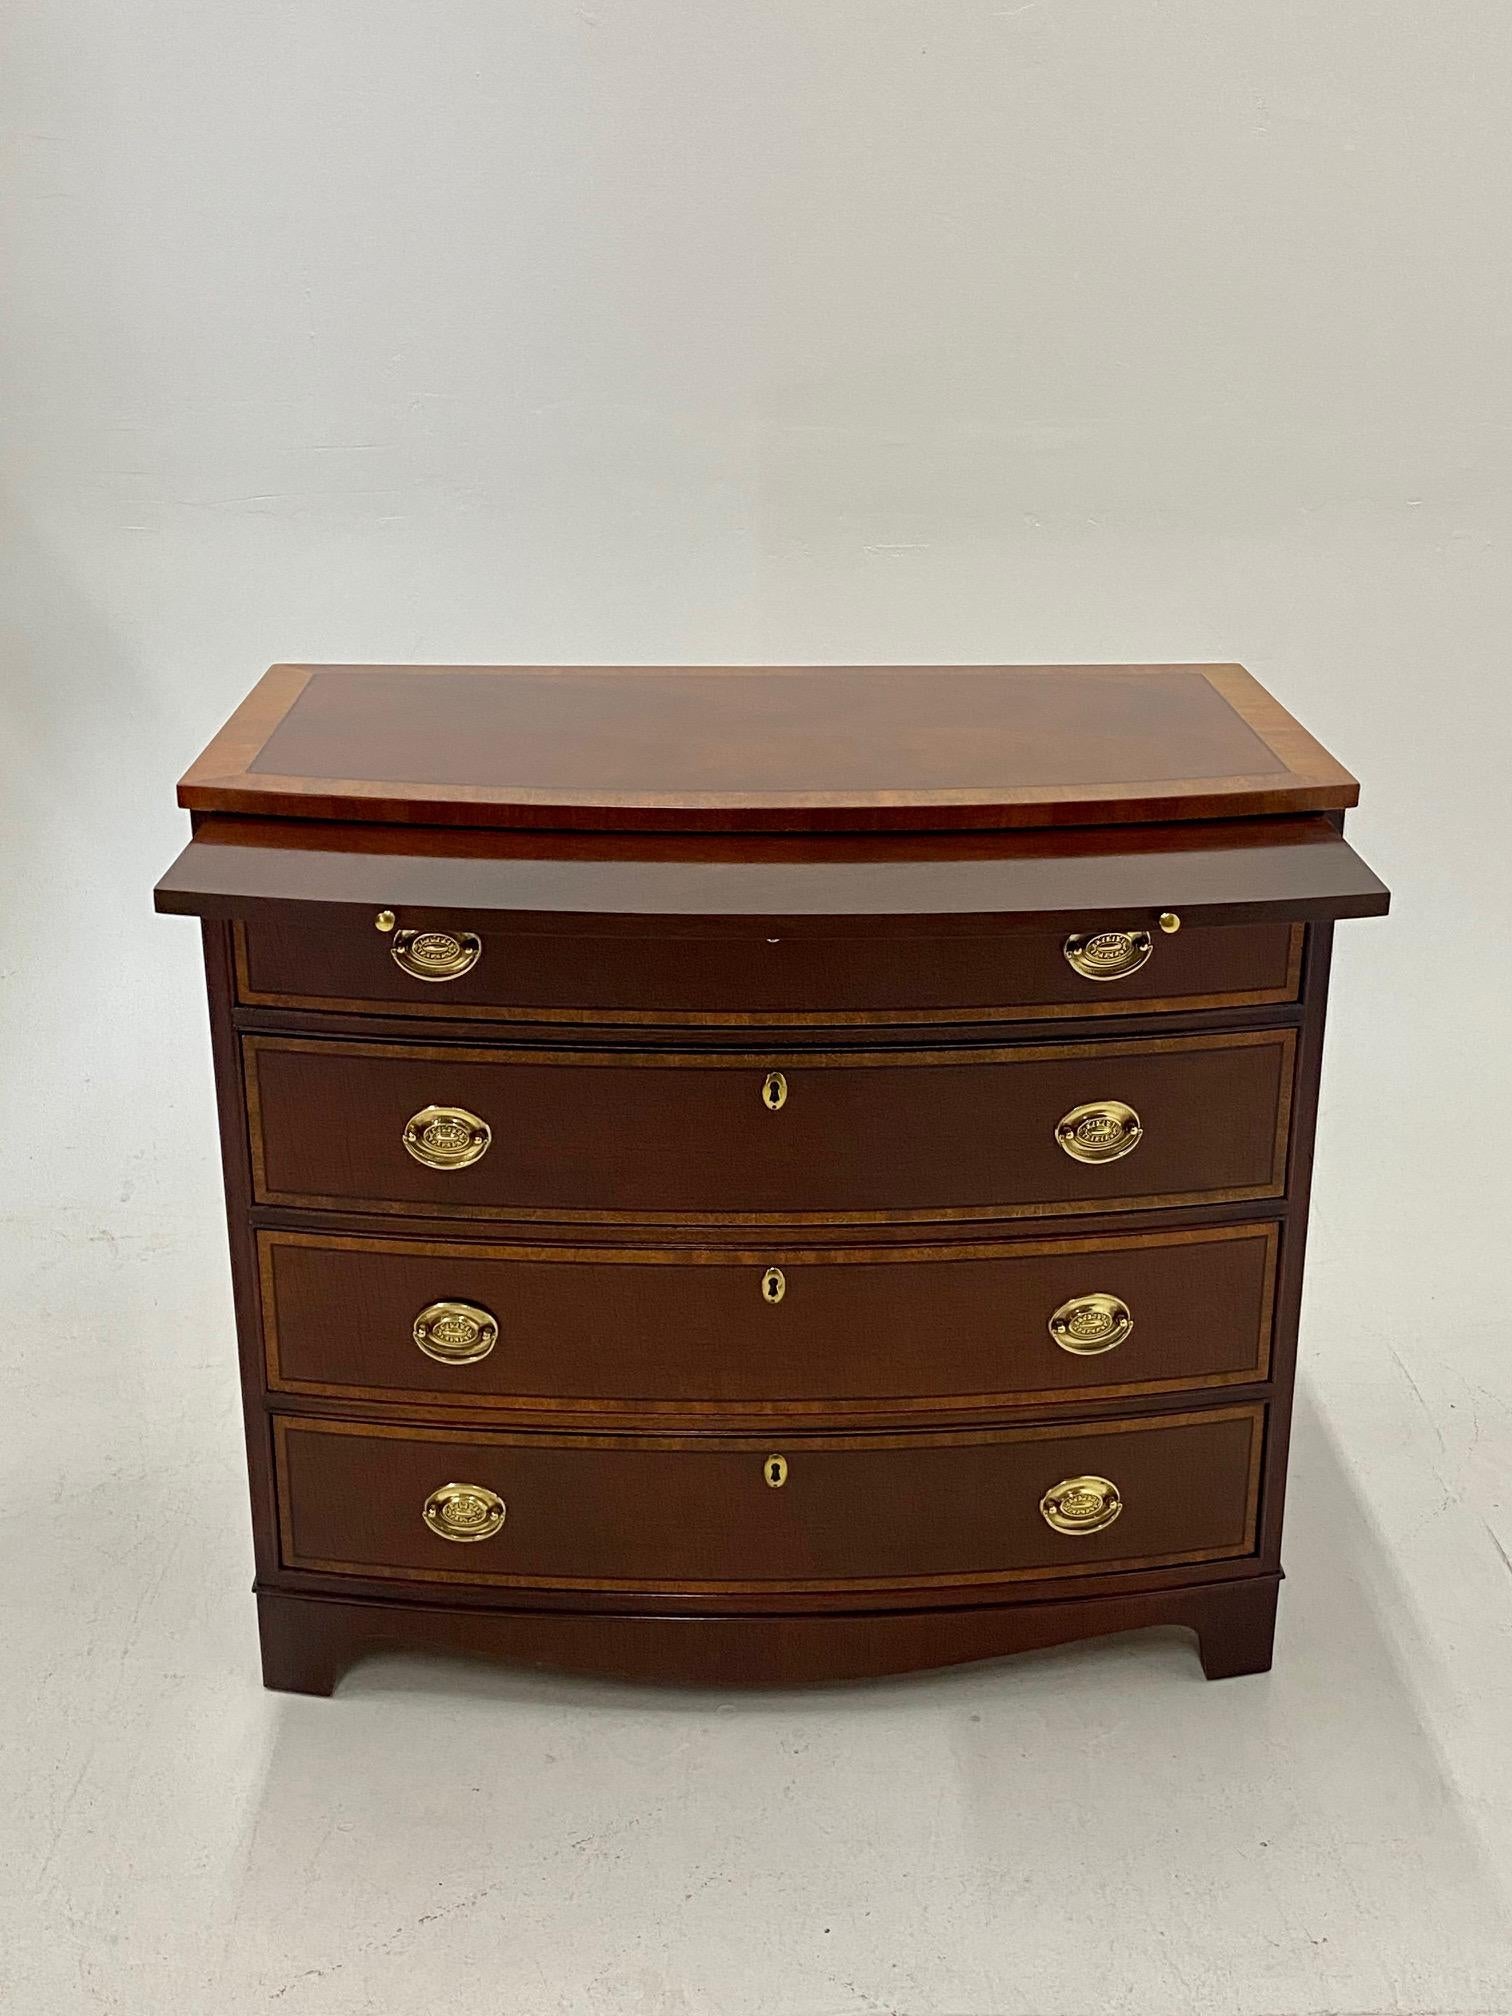 Handsome Bow Front Mahogany and Satinwood Bachelors Chest of Drawers 3